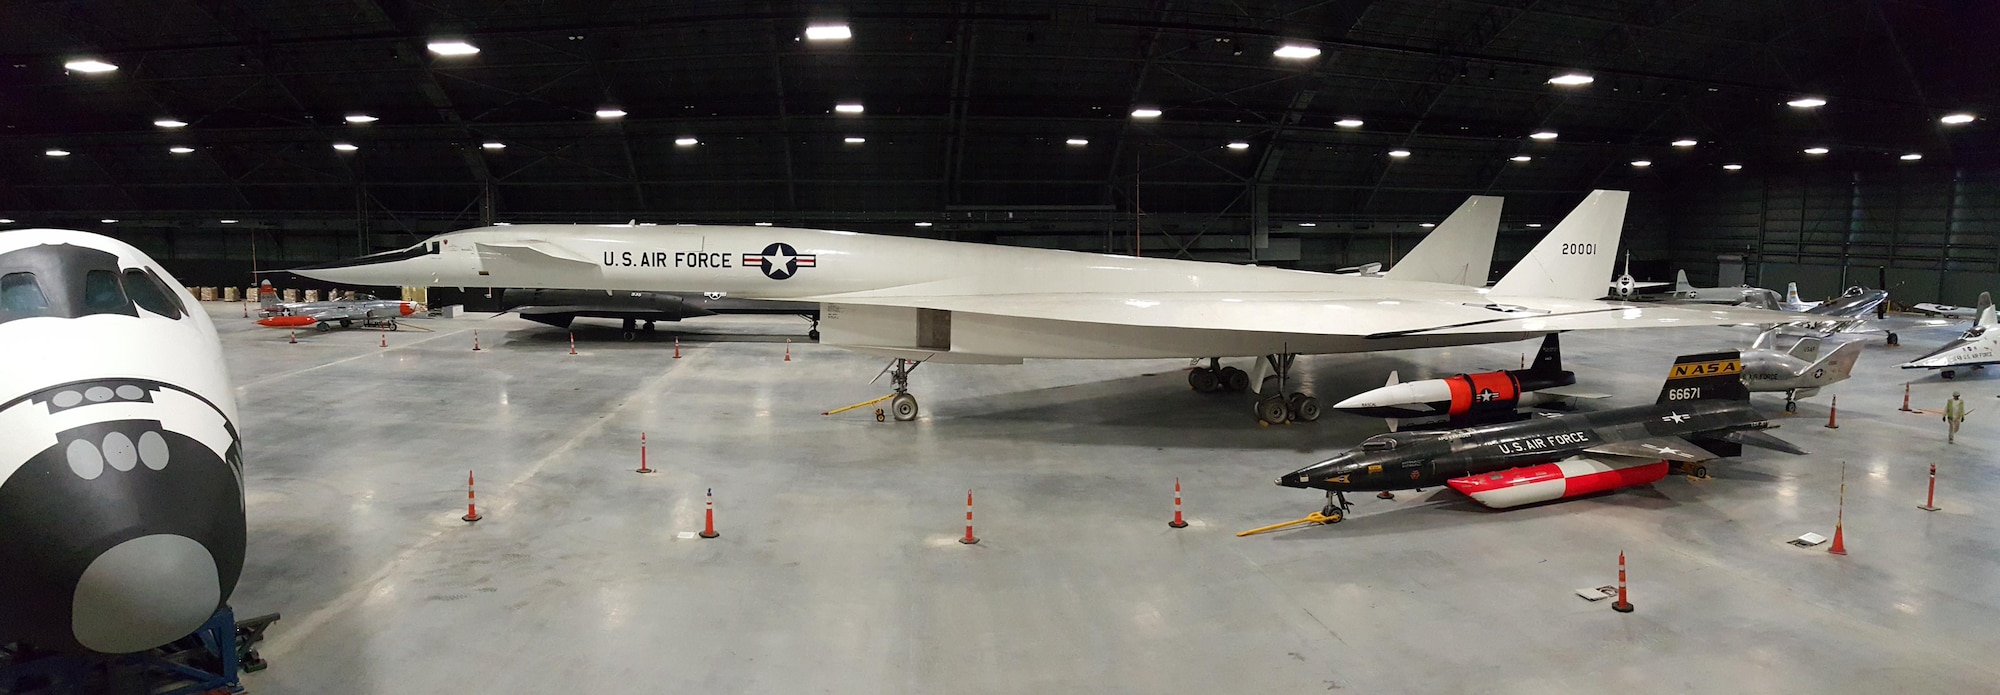 Restoration staff move the North American XB-70 Valkyrie into the new fourth building at the National Museum of the U.S. Air Force on Oct. 27, 2015. This photo shows the current view from the balcony of the fourth building. (U.S. Air Force photo by Doug Lantry)